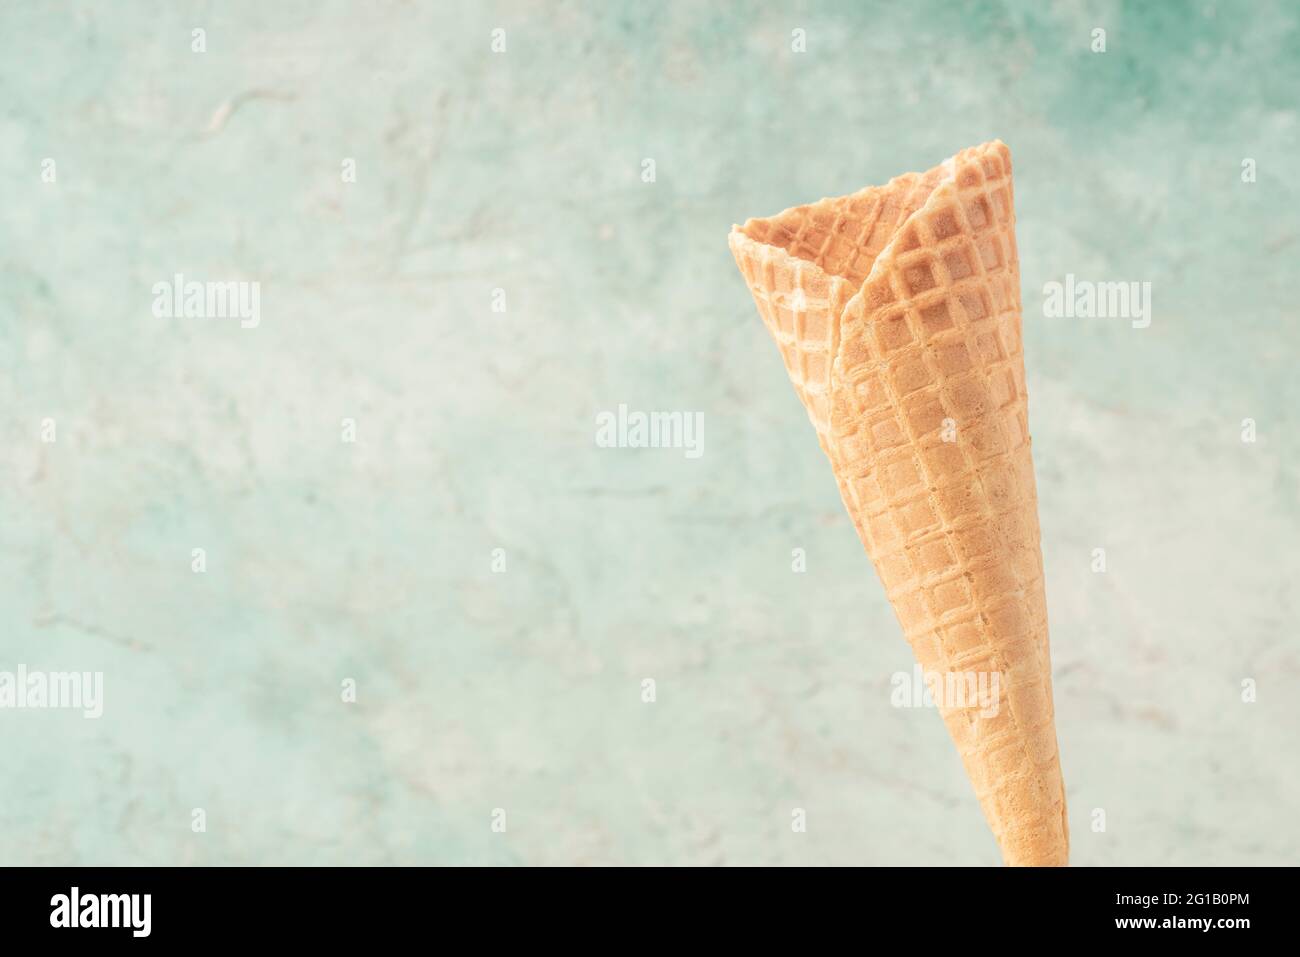 https://c8.alamy.com/comp/2G1B0PM/closeup-of-an-empty-ice-cream-cone-over-green-background-with-copy-space-2G1B0PM.jpg